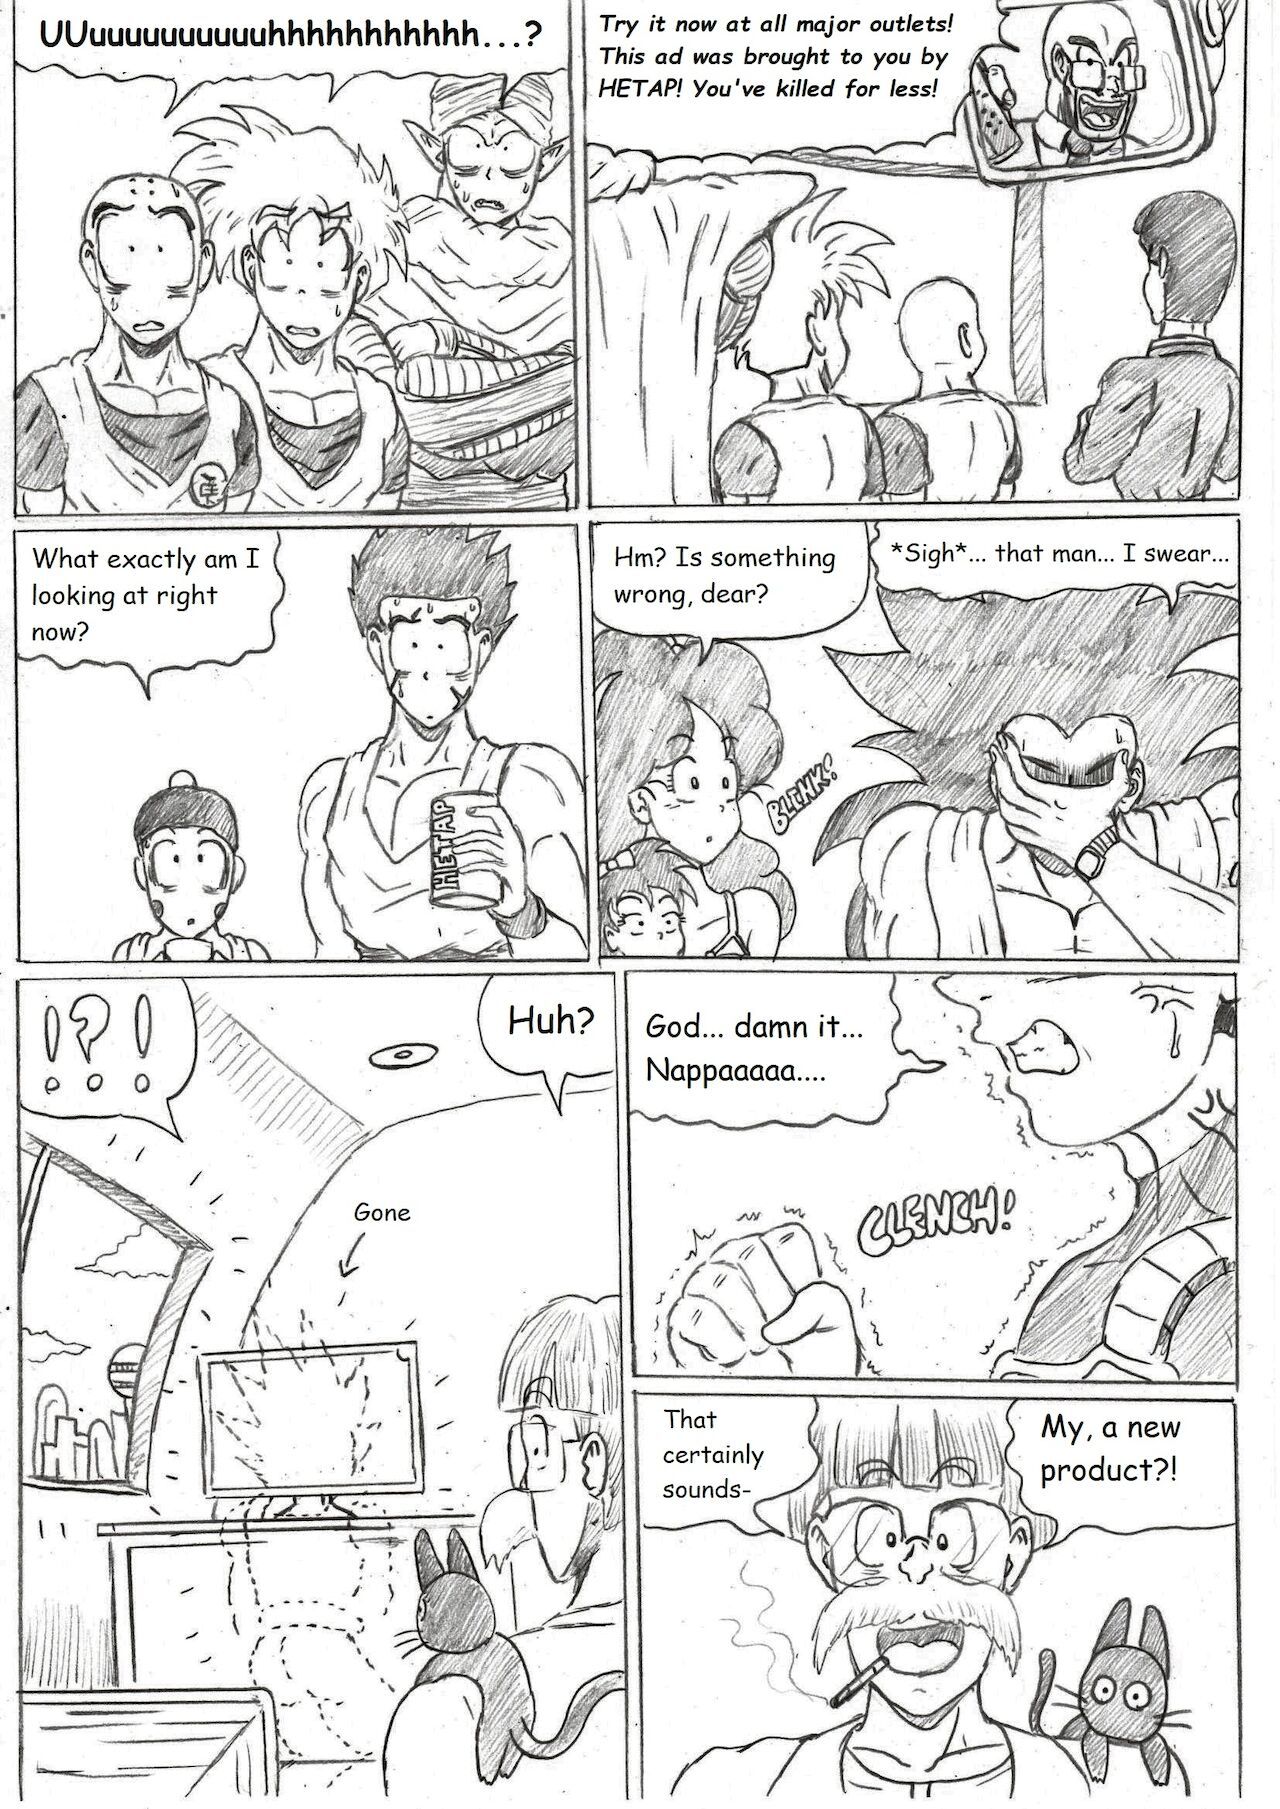 [TheWriteFiction] Dragonball Z Golden Age - Chapter 3 - The Strange Tournament (Ongoing) 63